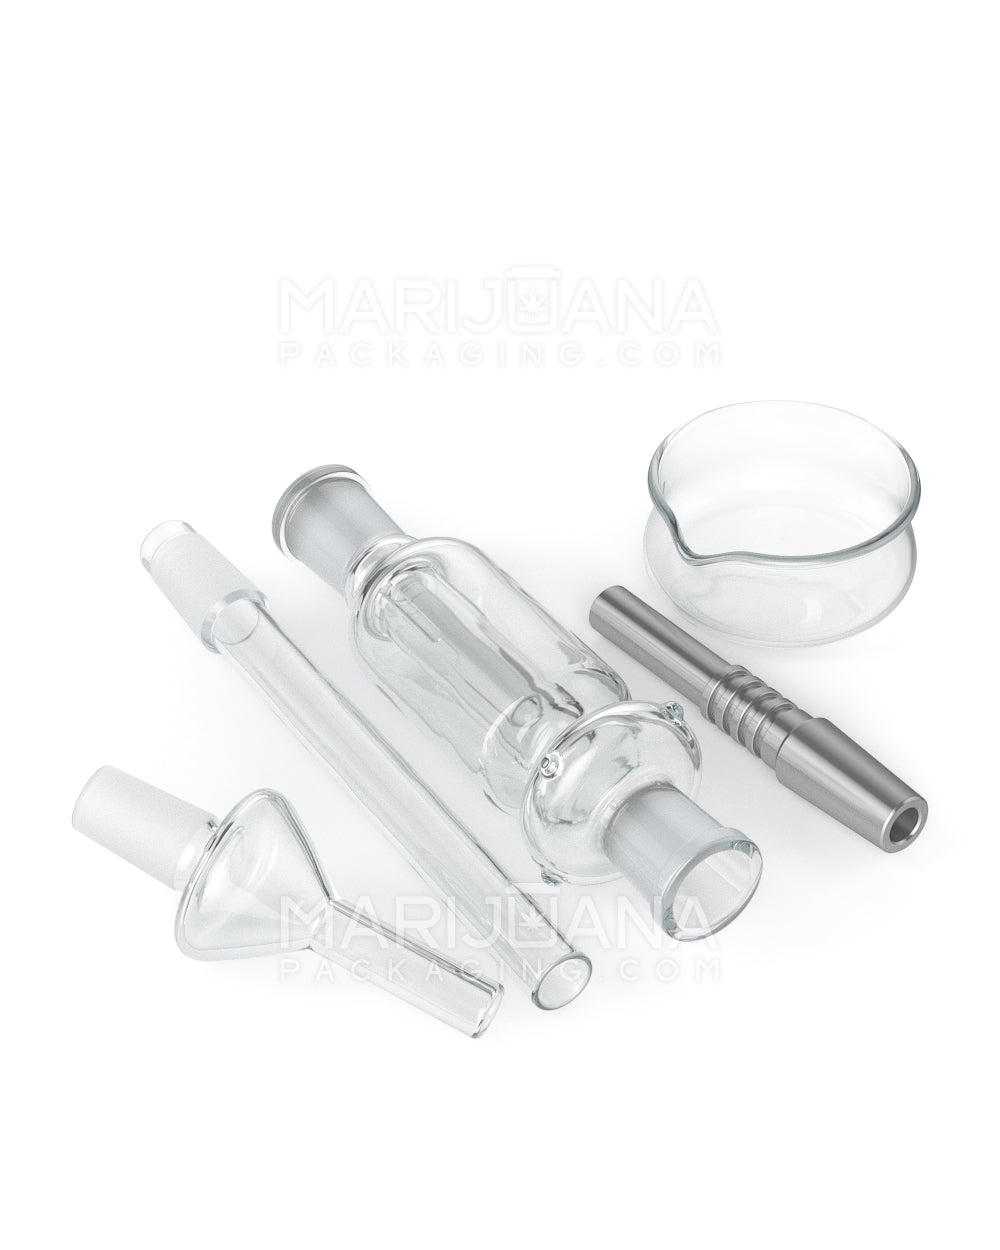 Nectar Collector Dab Pipe | 14in Long - 14mm Attachment - Clear - 3